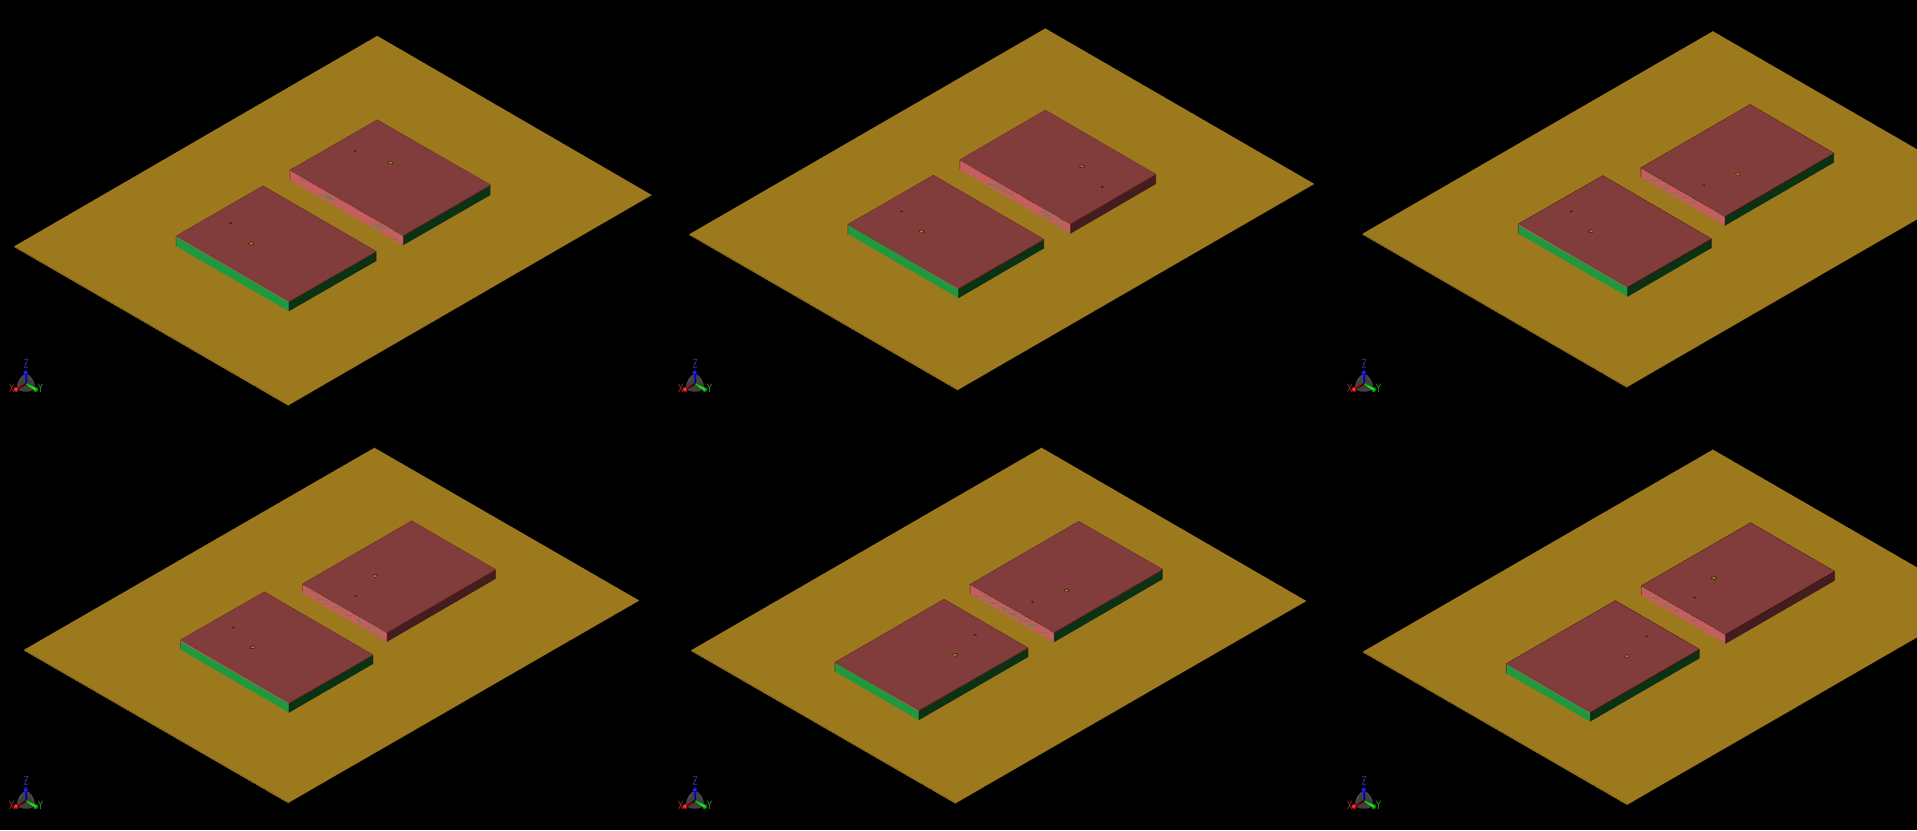 Figure 11: Six configurations of a 1x2 MIMO array were evaluated for performance. In each case, the separation between antenna elements is 10 mm and a shorted side is always facing the adjacent element. The configurations are labeled a, b, and c acr…